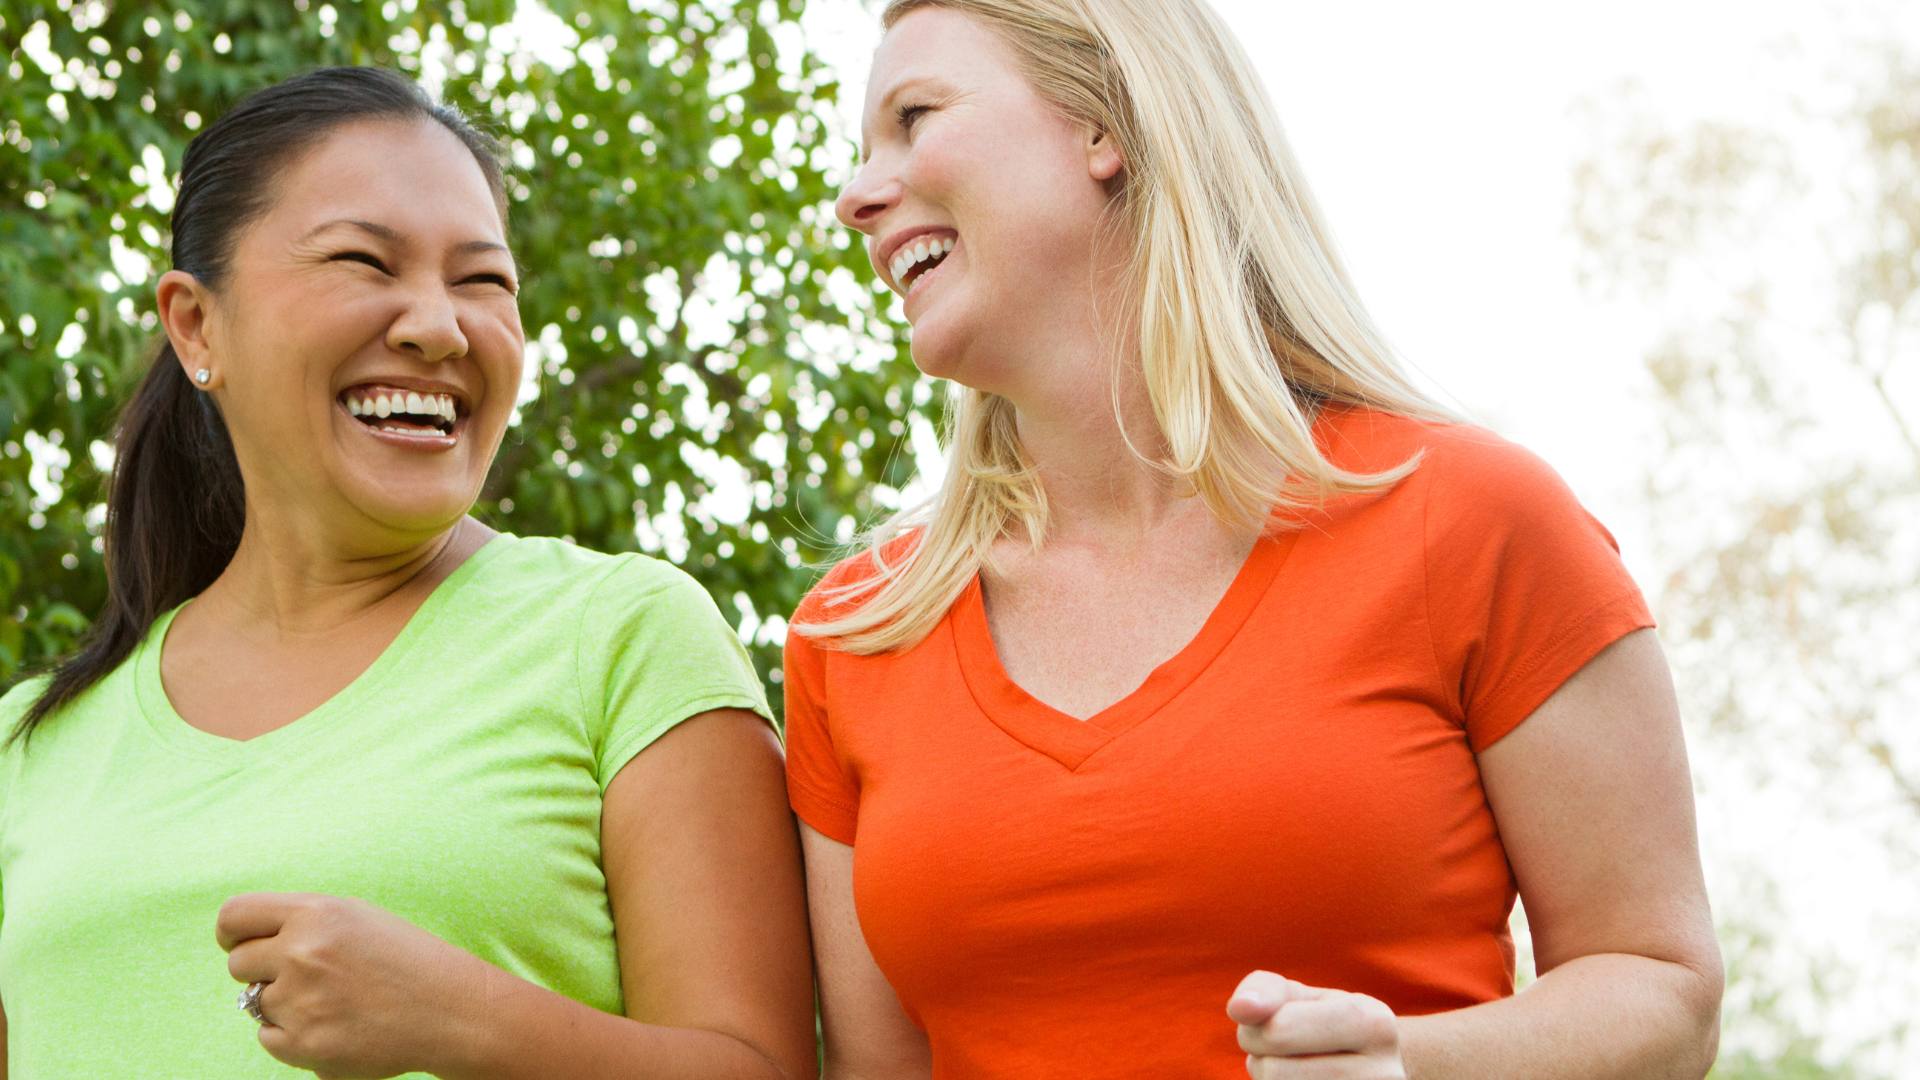 Two women smiling and walking side-by-side, answering the question "how to lose 10 pounds in 2 weeks."